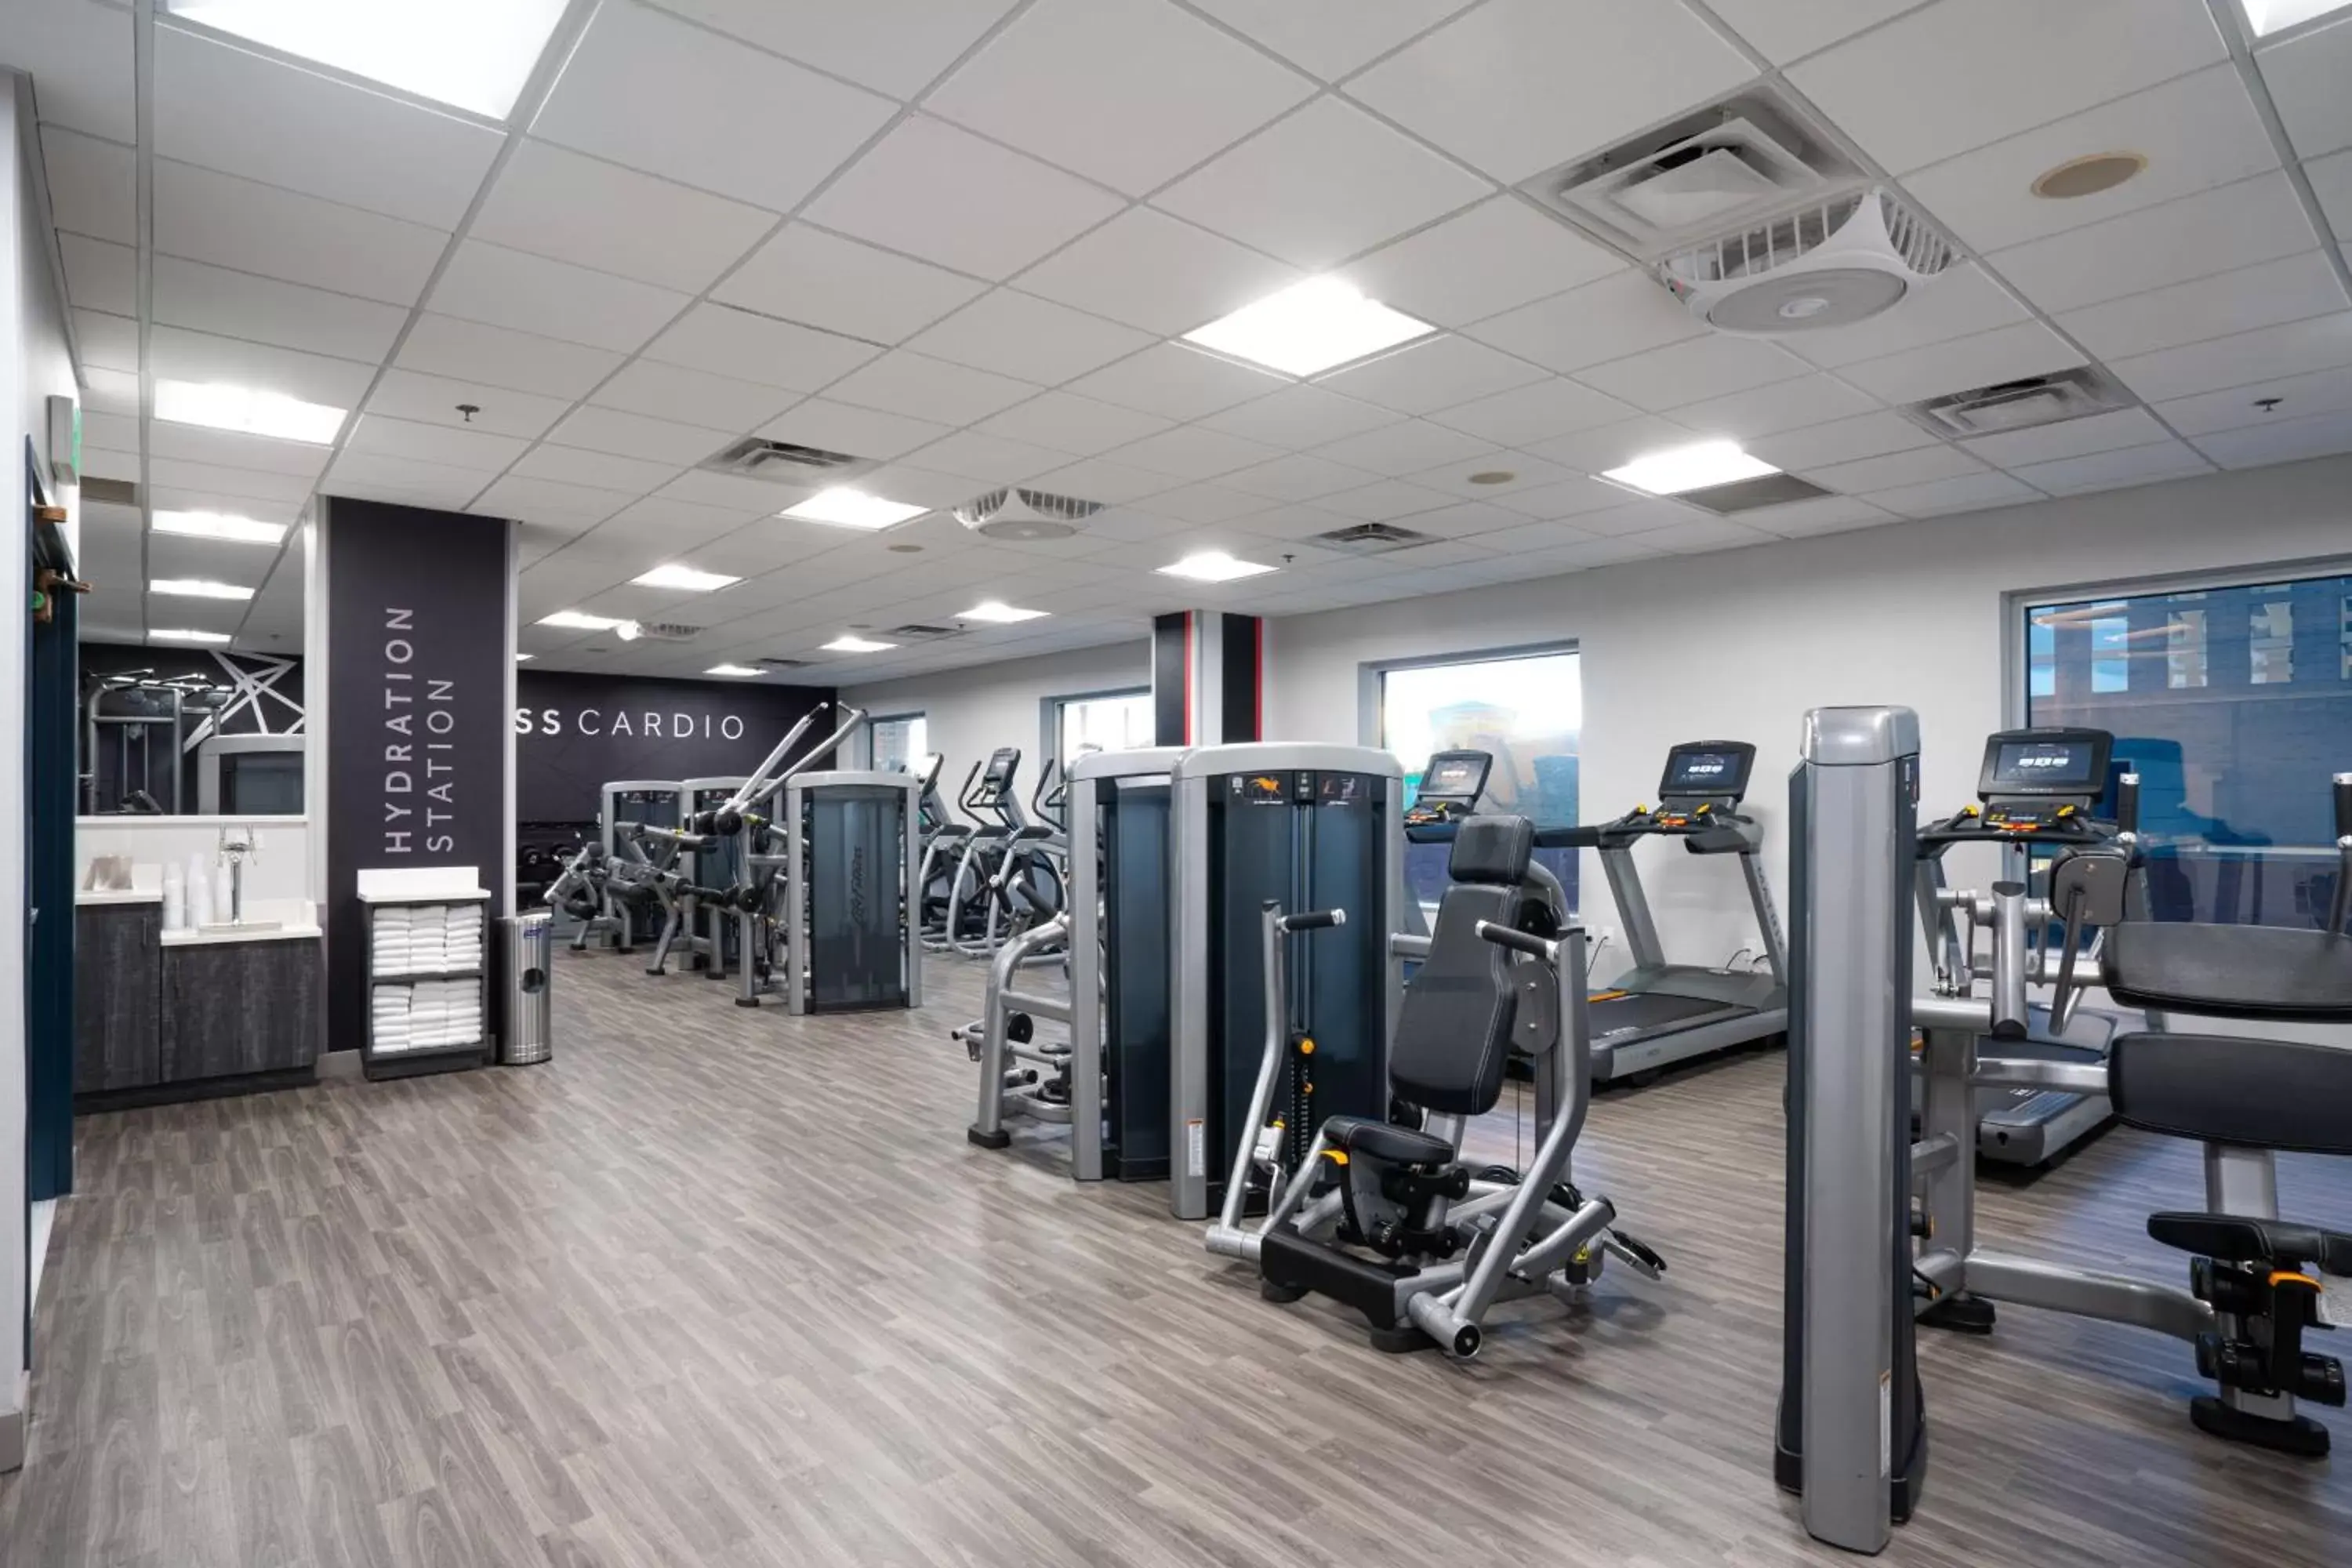 Fitness centre/facilities, Fitness Center/Facilities in Louisville Marriott Downtown